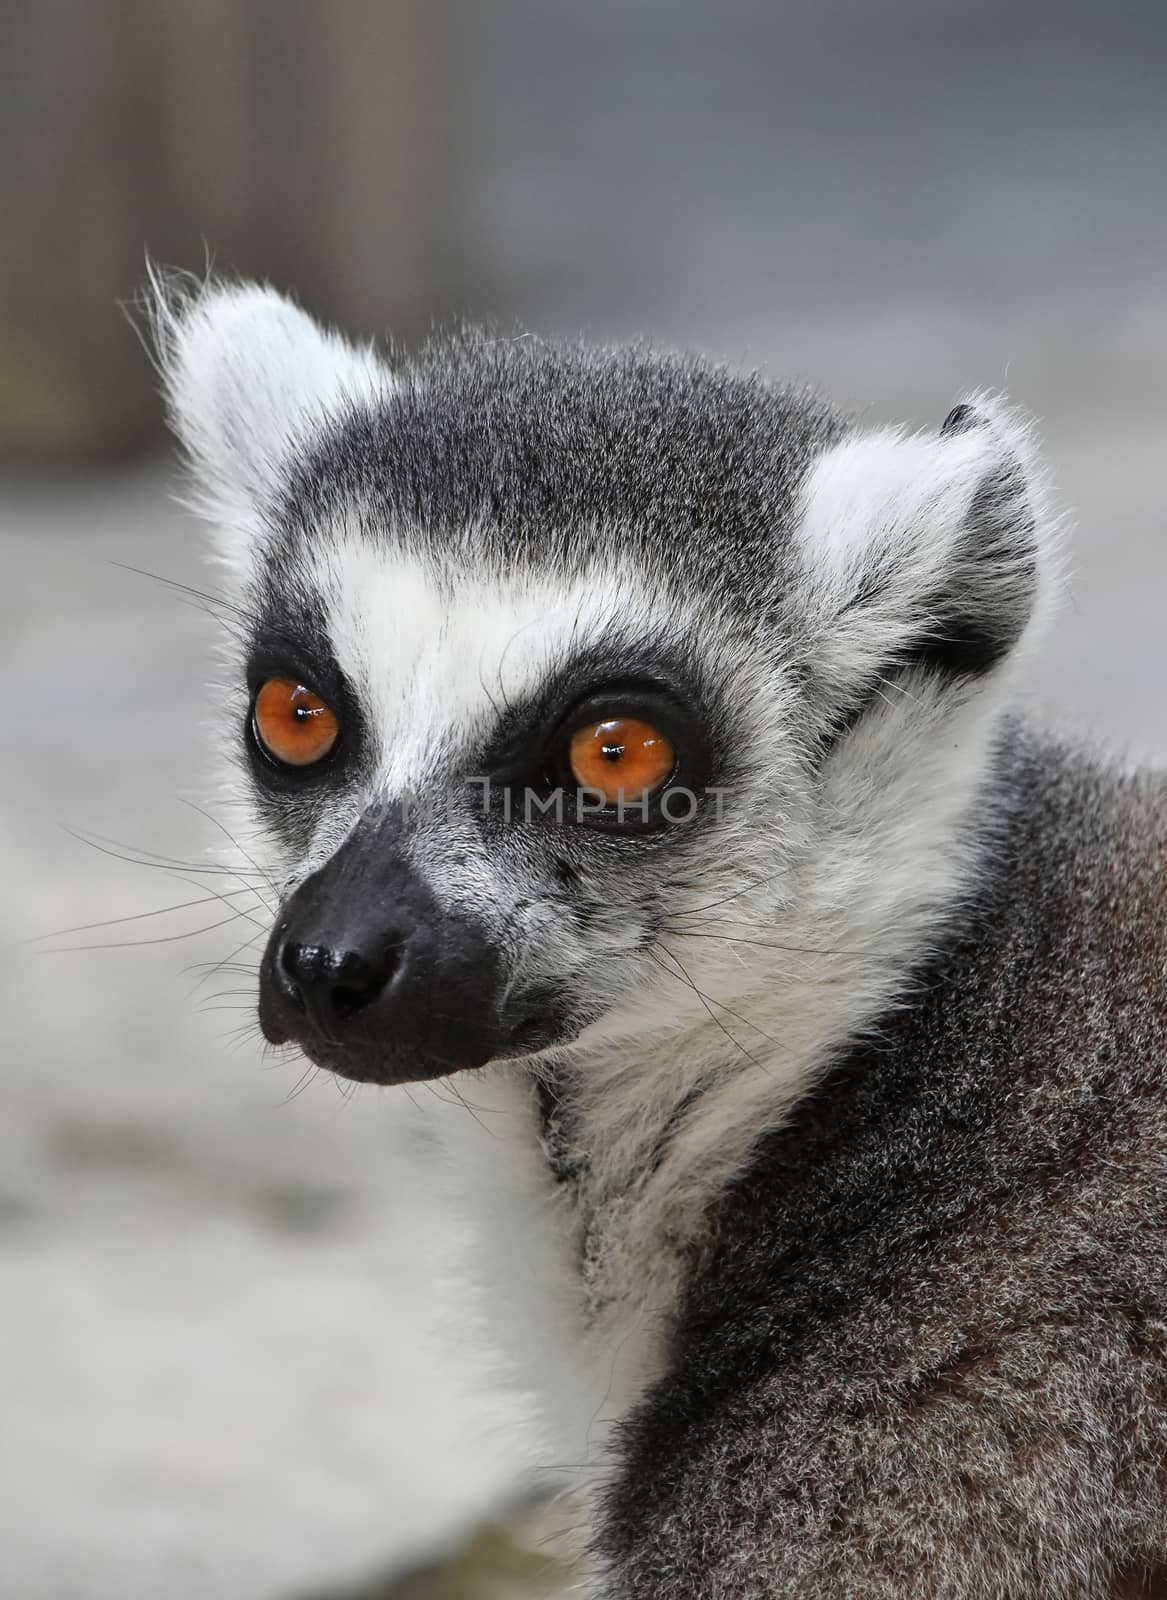 Close up portrait of one cute ring-tailed lemur (aka lemur catta, maky or Madagascar cat) in zoo, looking at camera